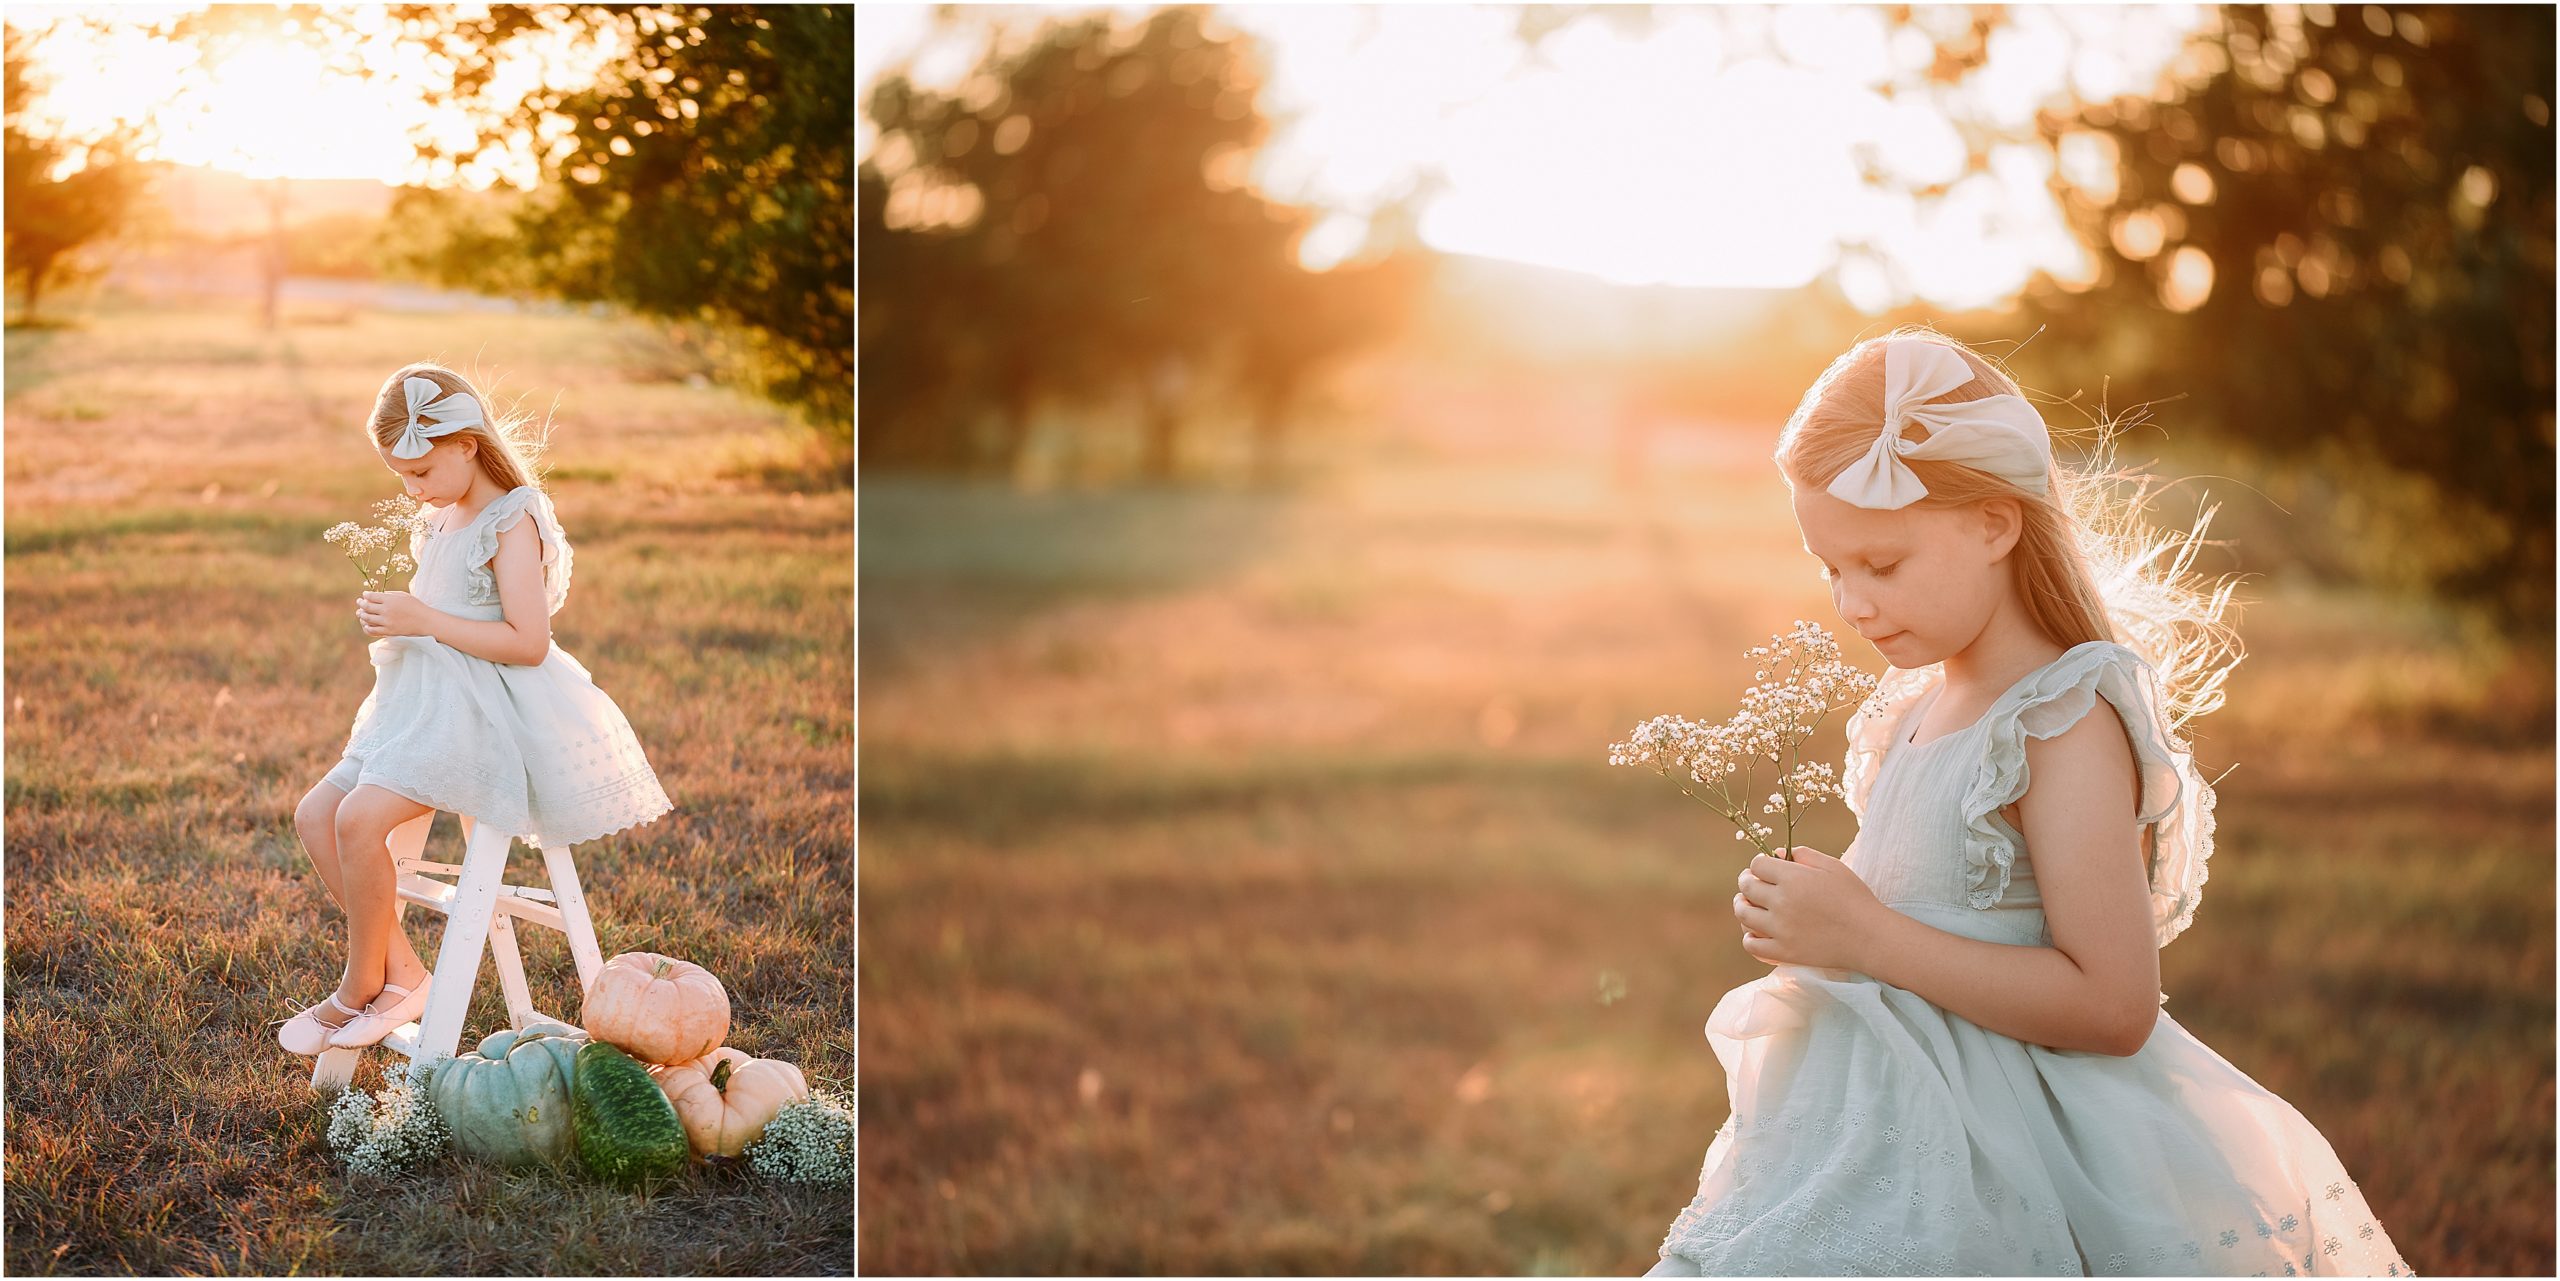 Dreamy birthday session for Violet!